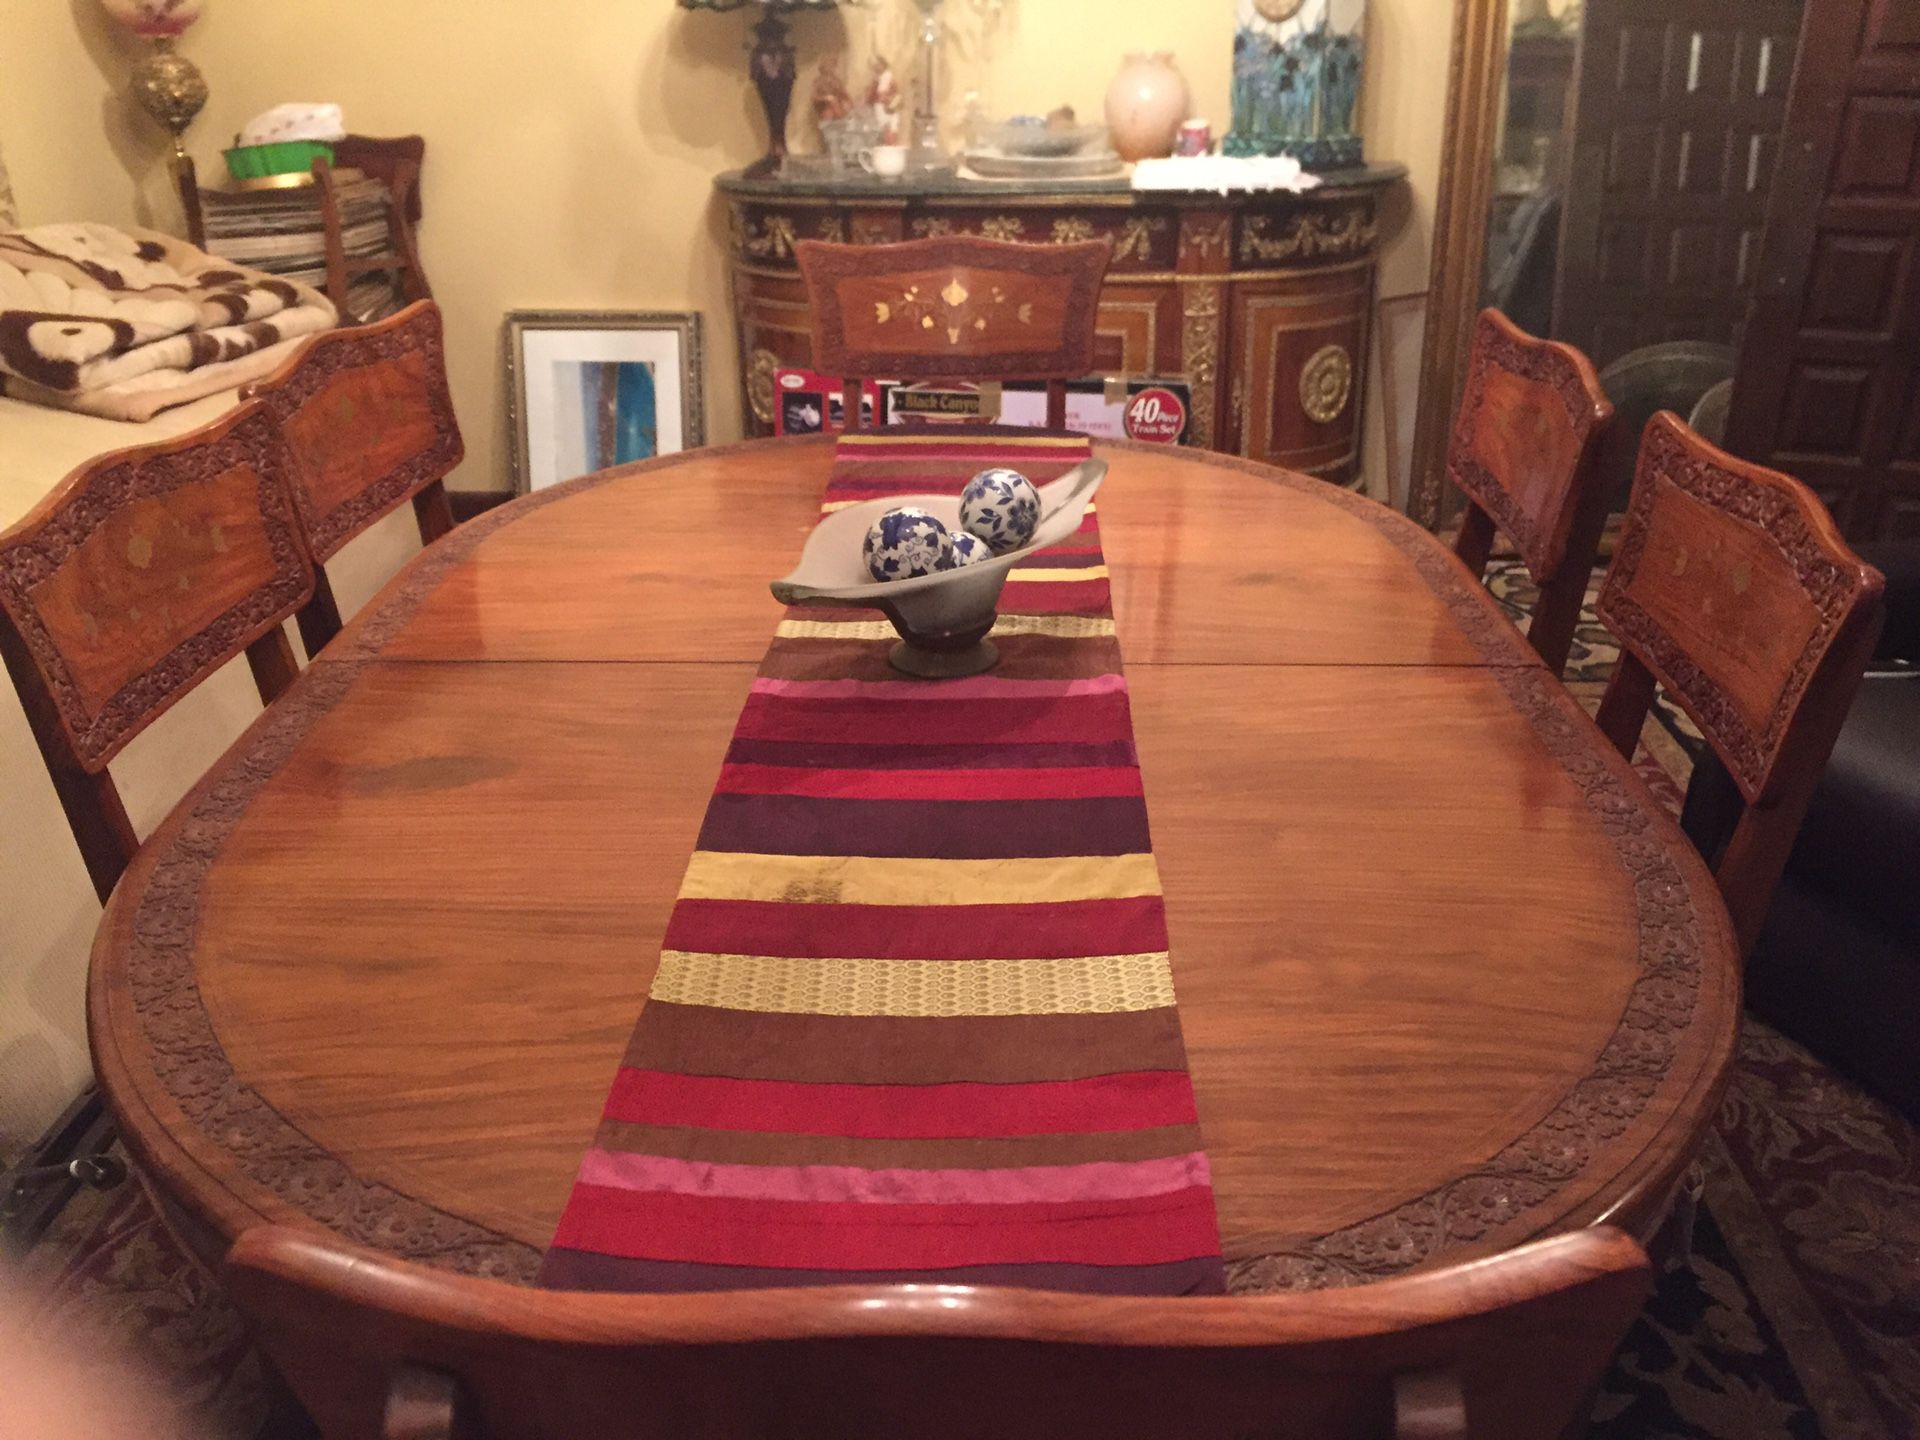 Antique gold inlaid dining table with 8 chairs...